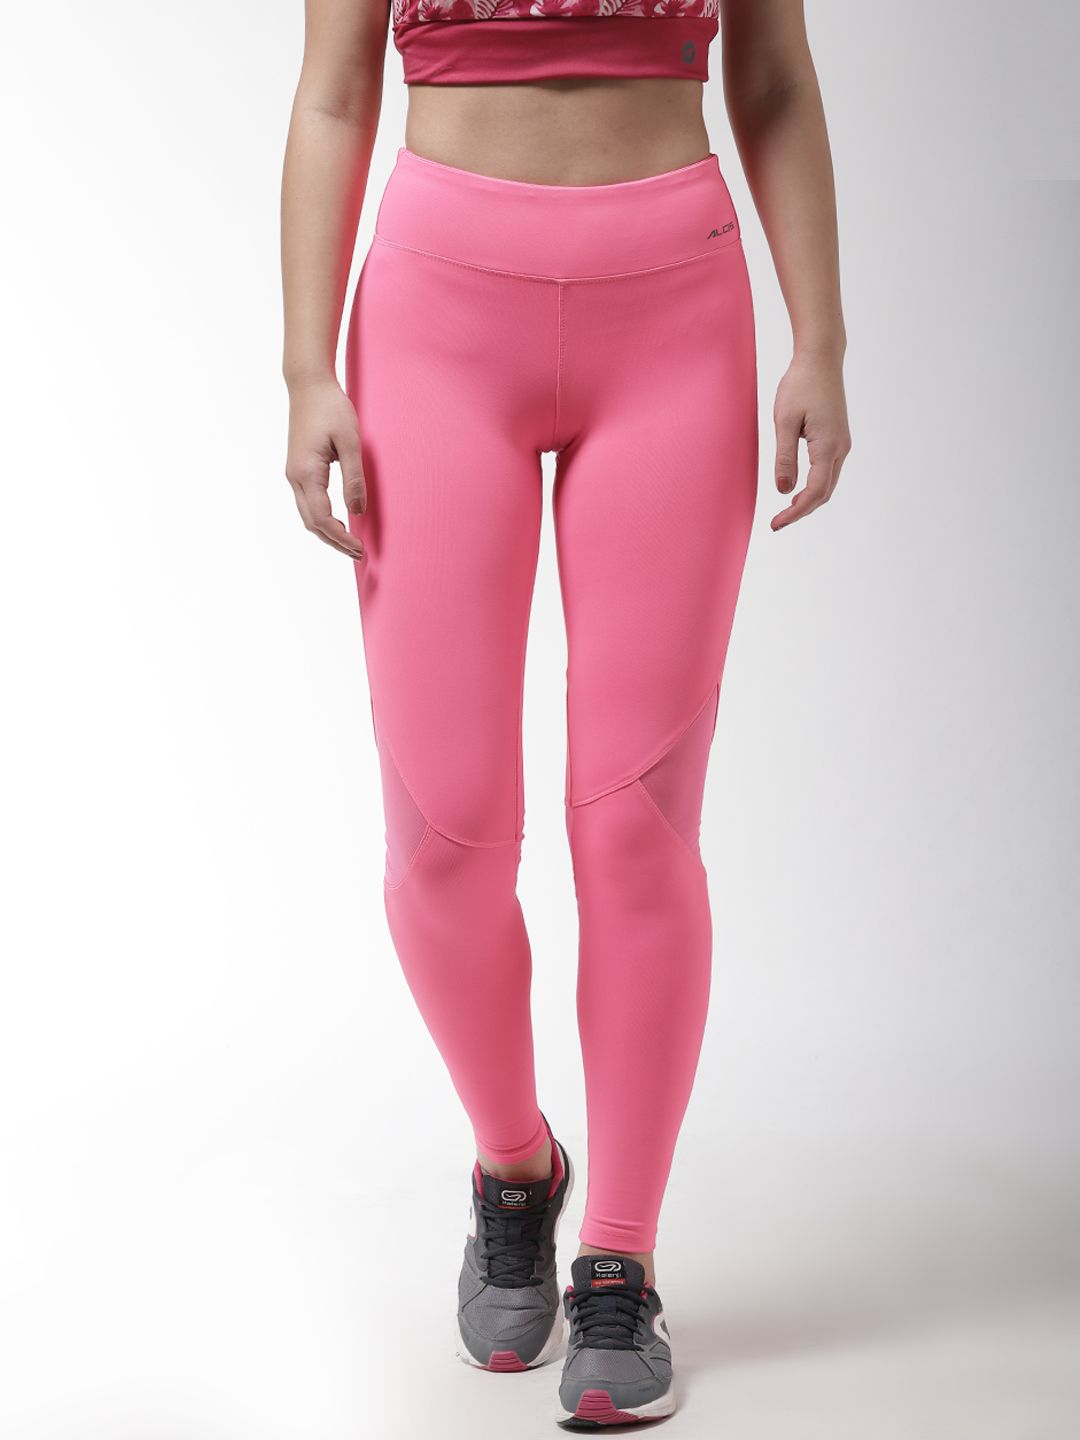 Alcis Pink Solid Sports Tights Price in India